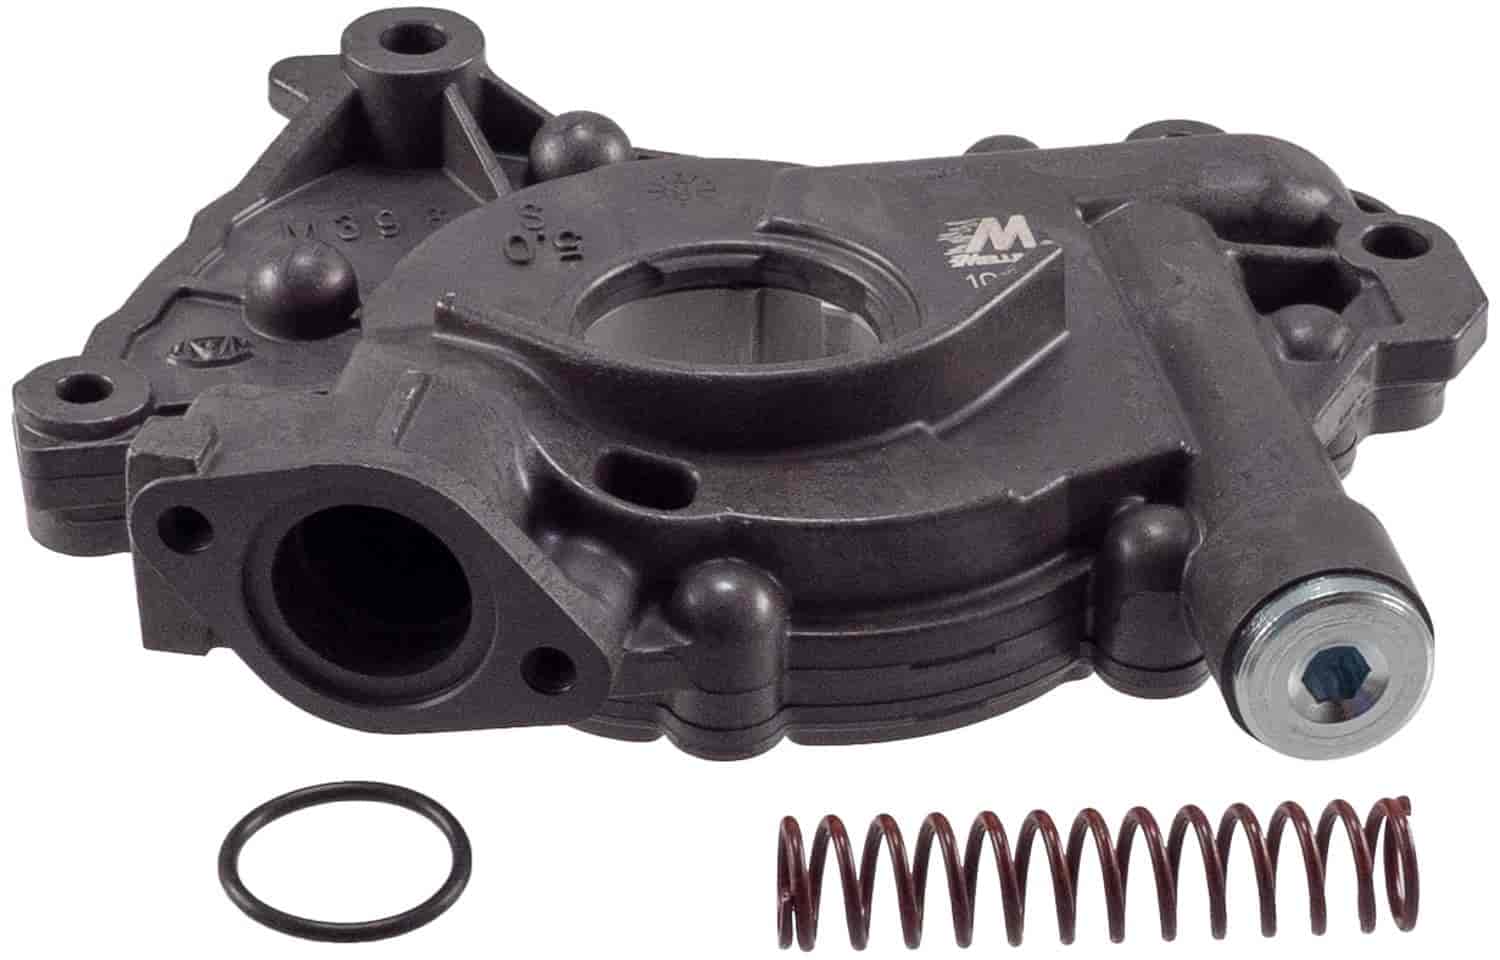 Oil Pump Fits Select 2011-2017 Ford F-150 & Mustang 5.0L